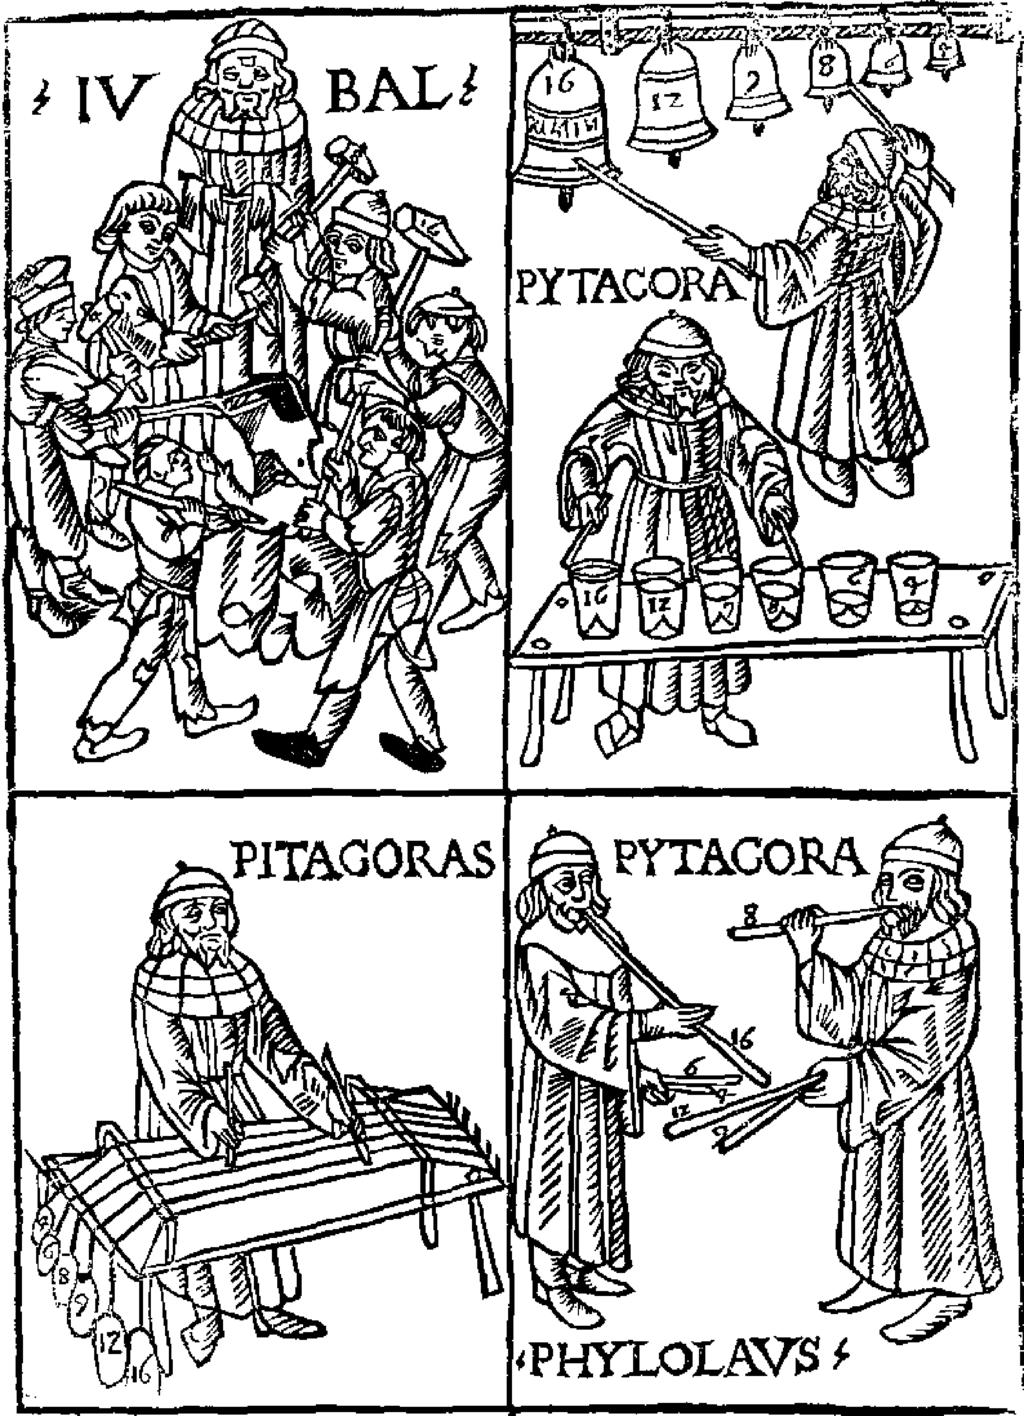 Figure 2.1 A late medieval woodcut from Franchino Gafurio s Theorica musice (1492) giving five apocryphal representations of how Pythagoras linked music and mathematics.